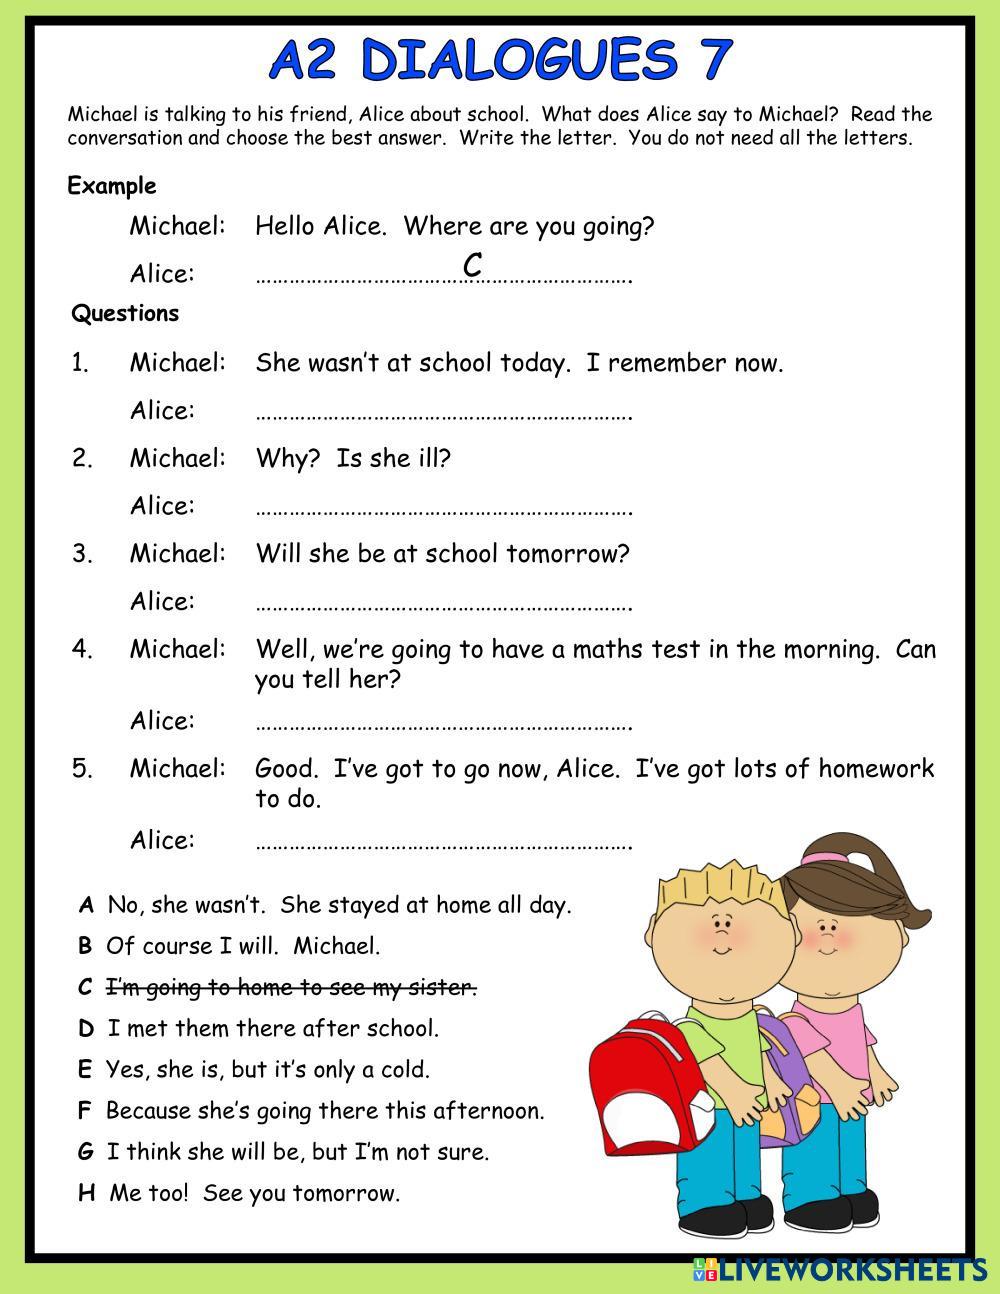 A2 Dialogues 7 | Live Worksheets